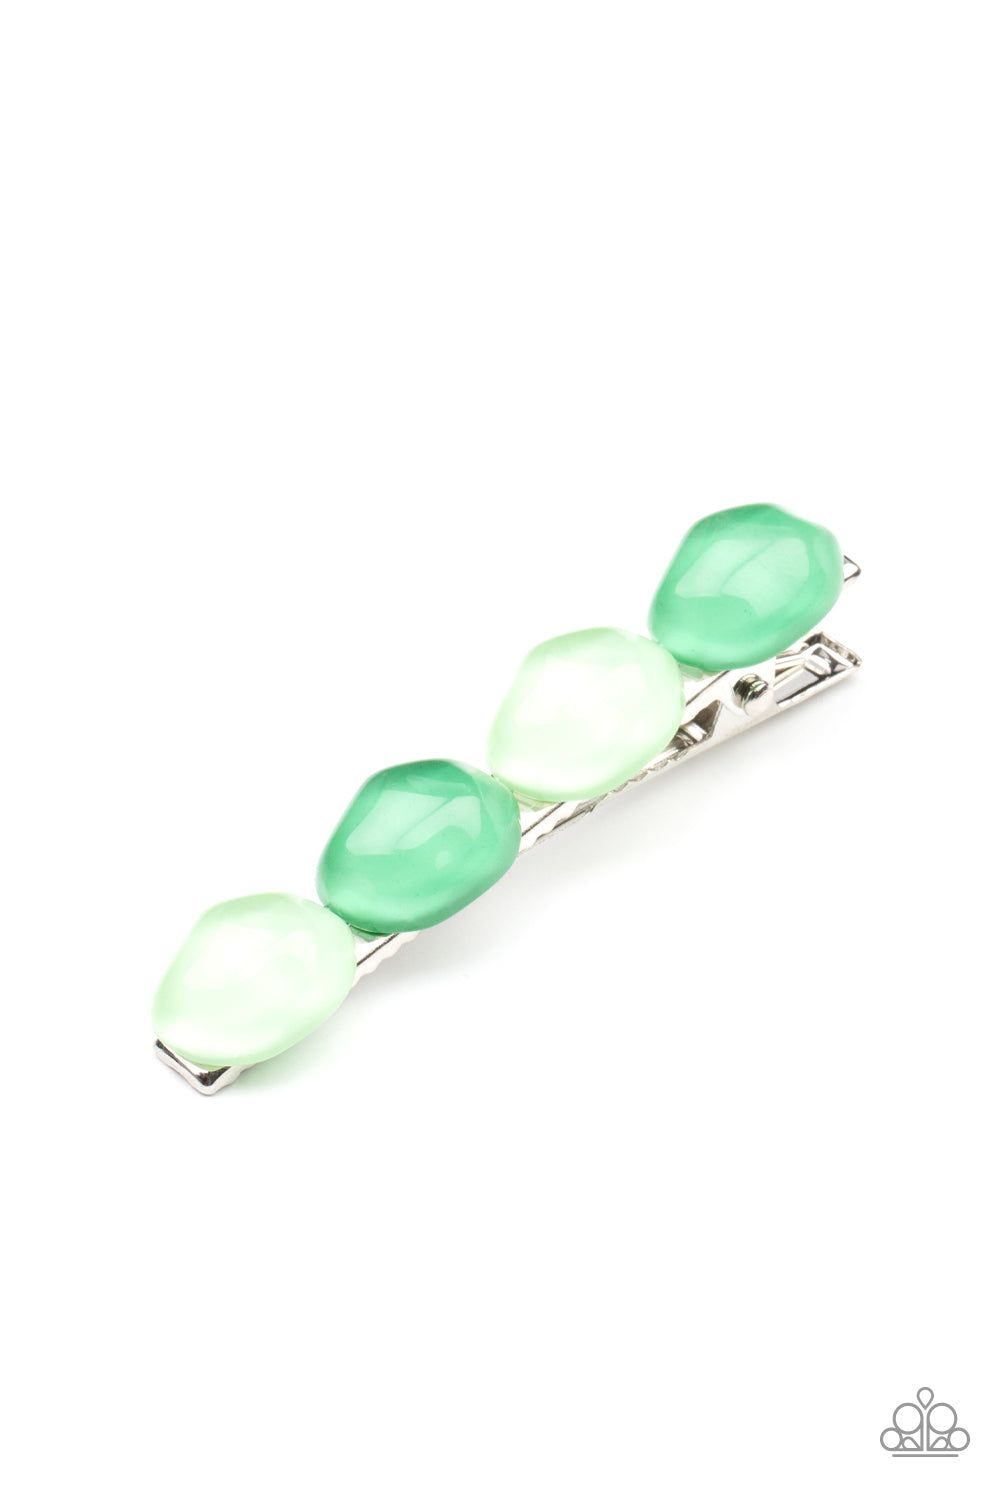 Bubbly Reflections - Green Paparazzi Hair Accessories